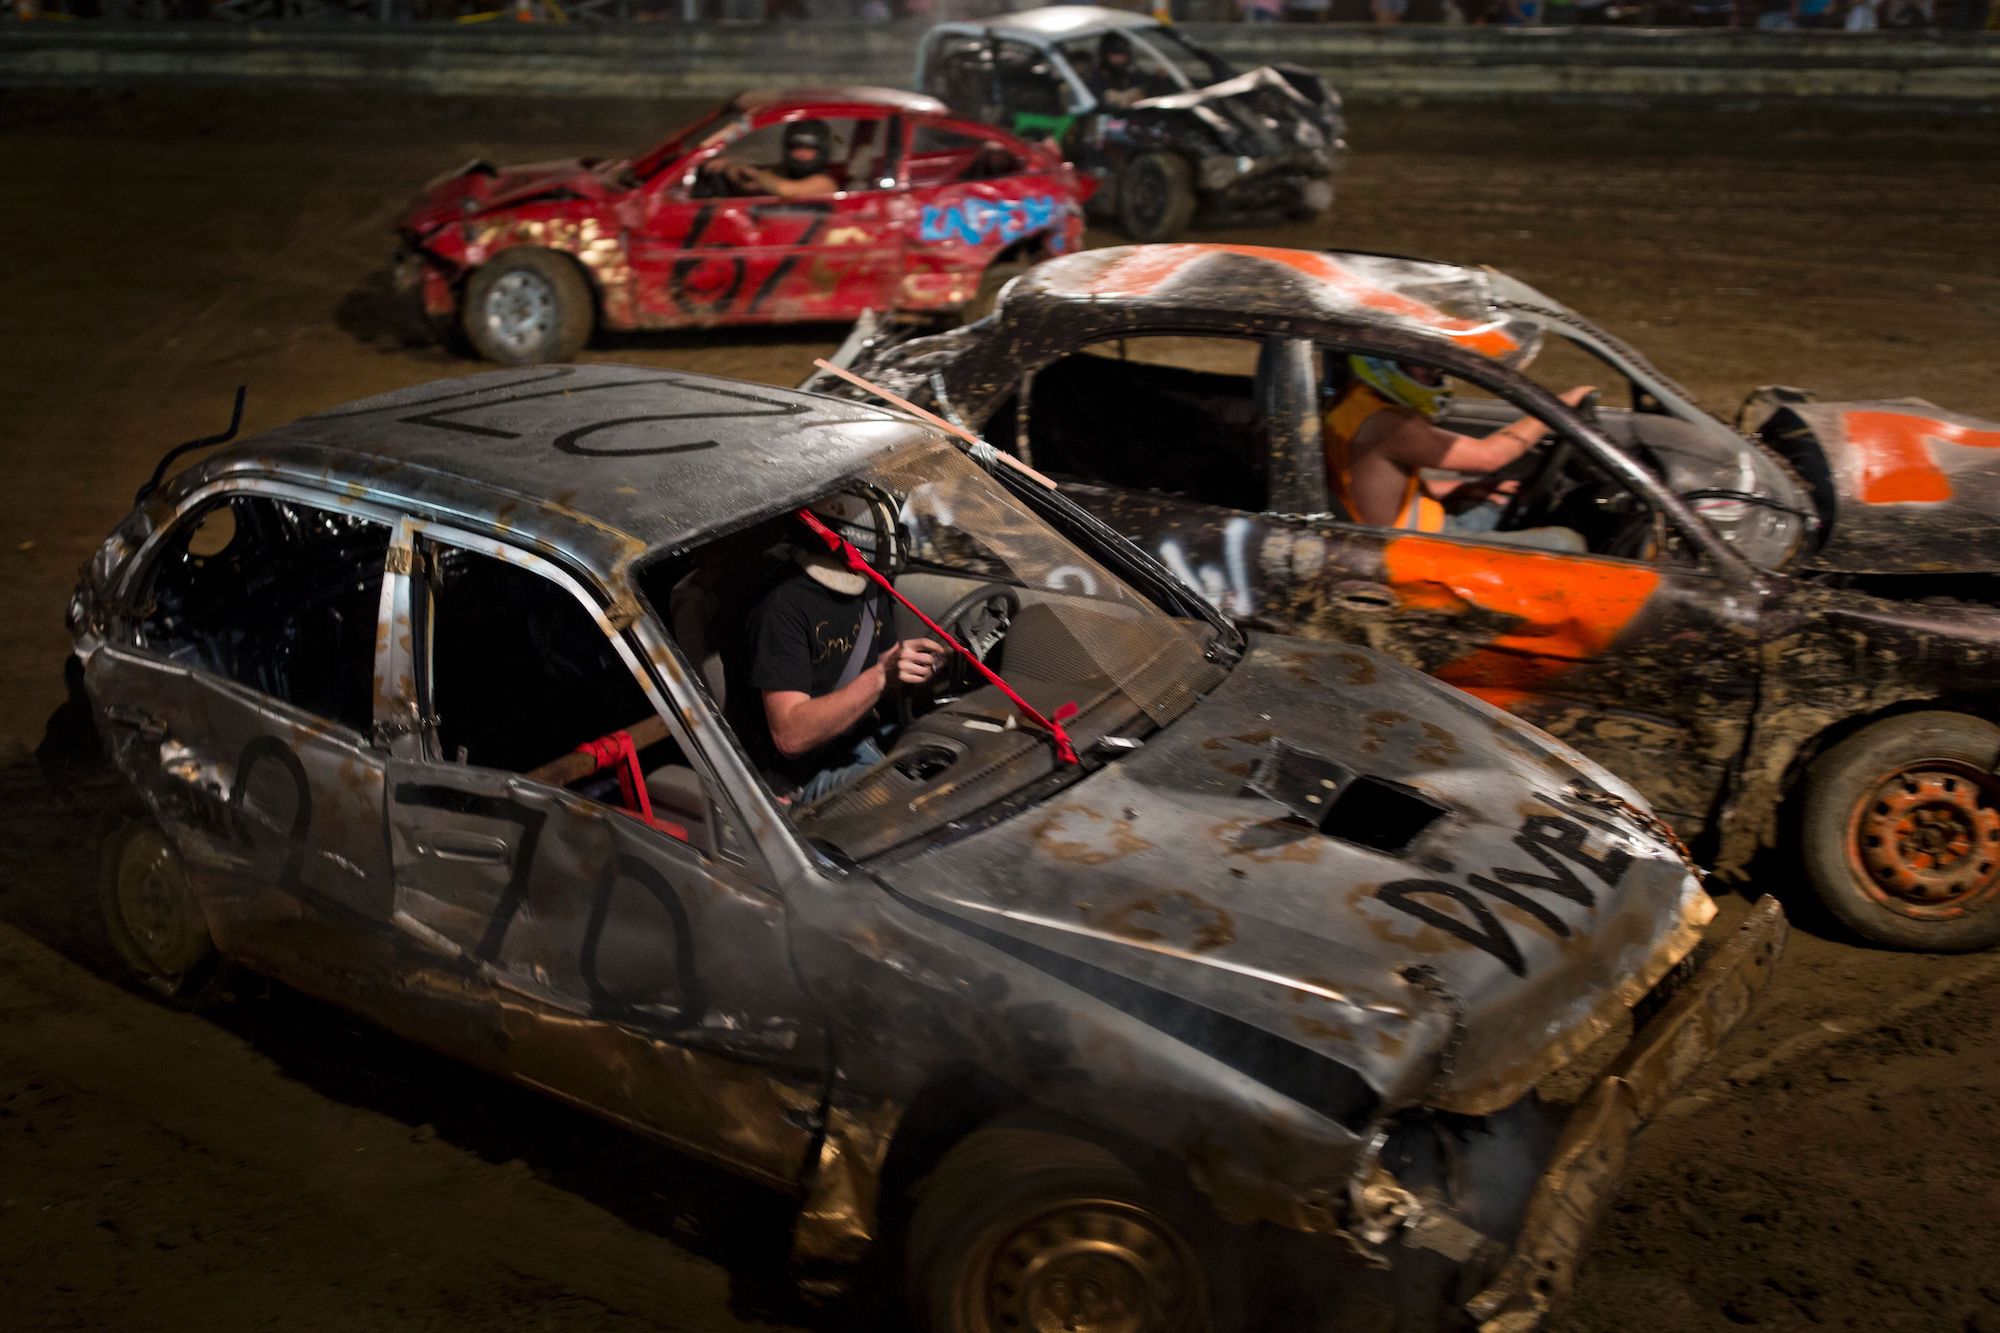 Drivers compete in a demolition derby at the Cambria County Fair on September 8, 2016, in Ebensburg, Pennsylvania